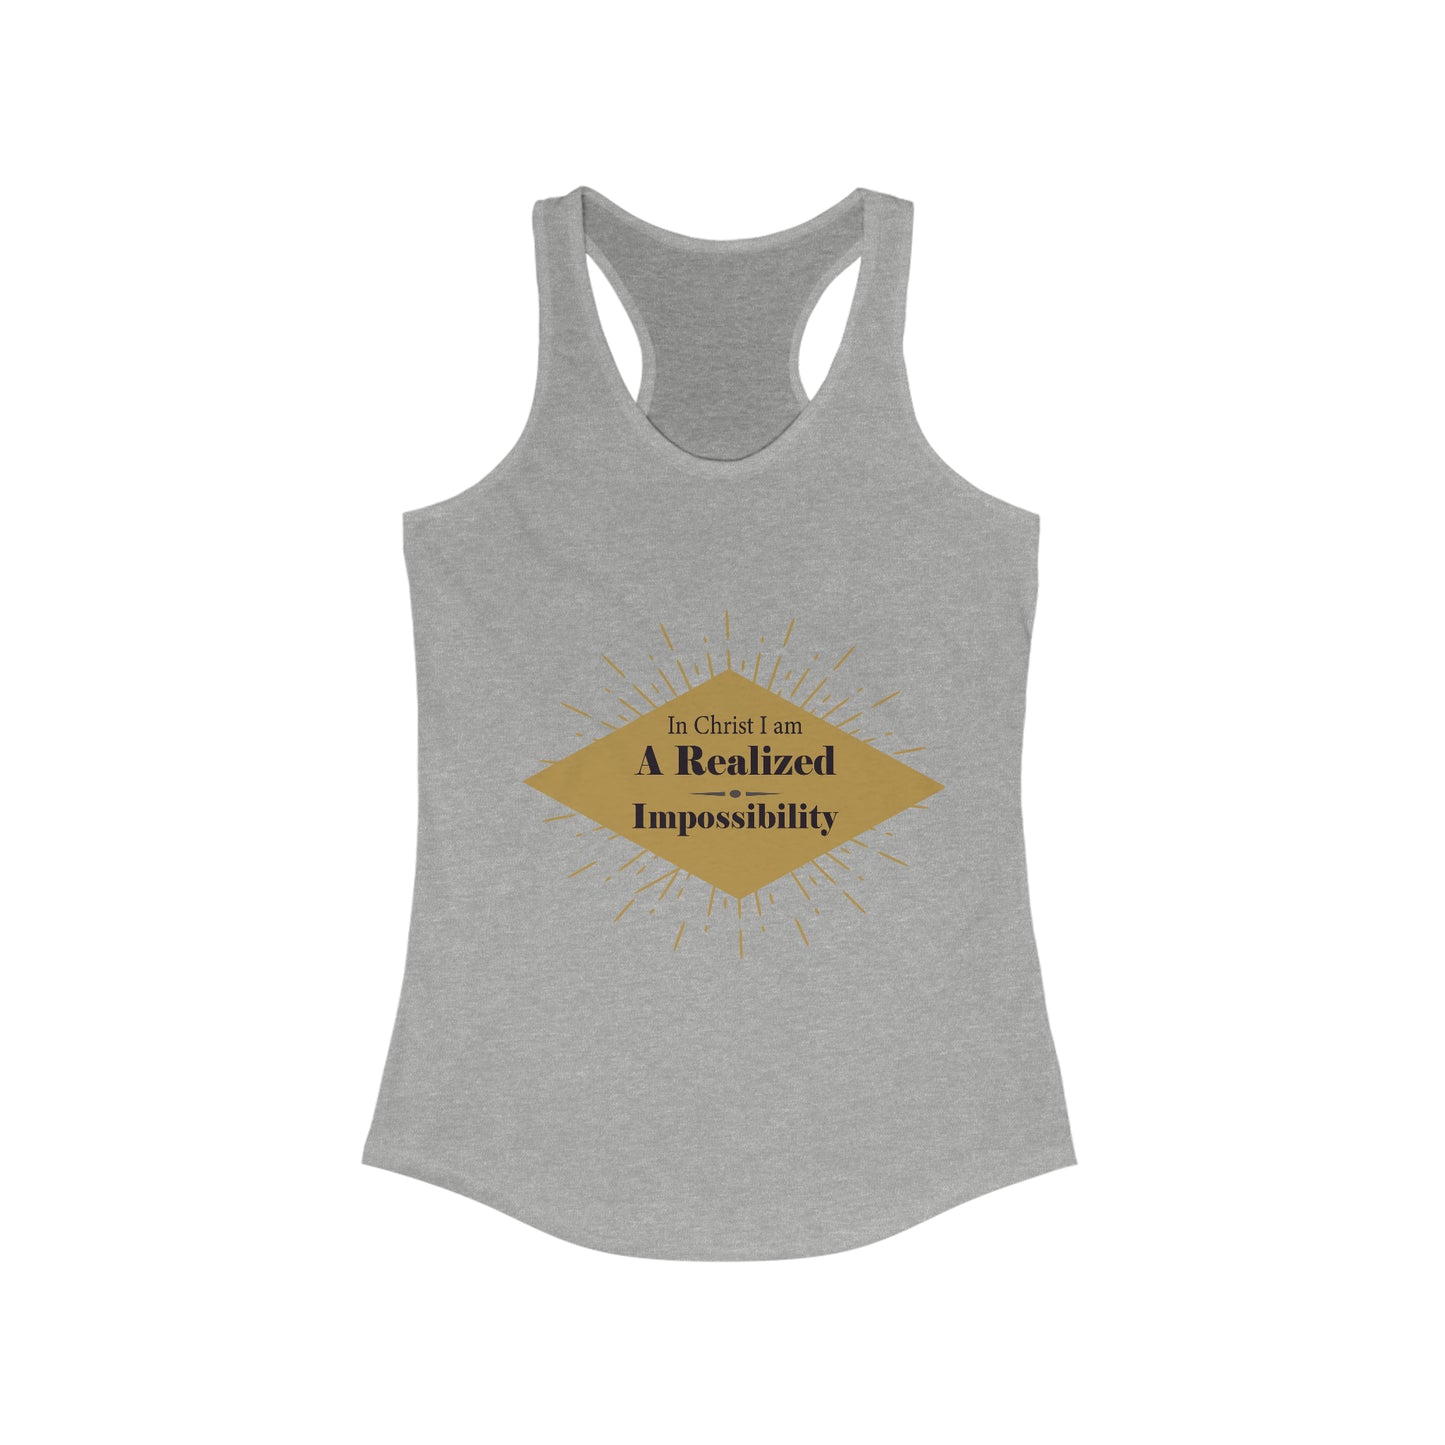 In Christ I Am A Realized Impossibility Women’s Slim fit tank-top